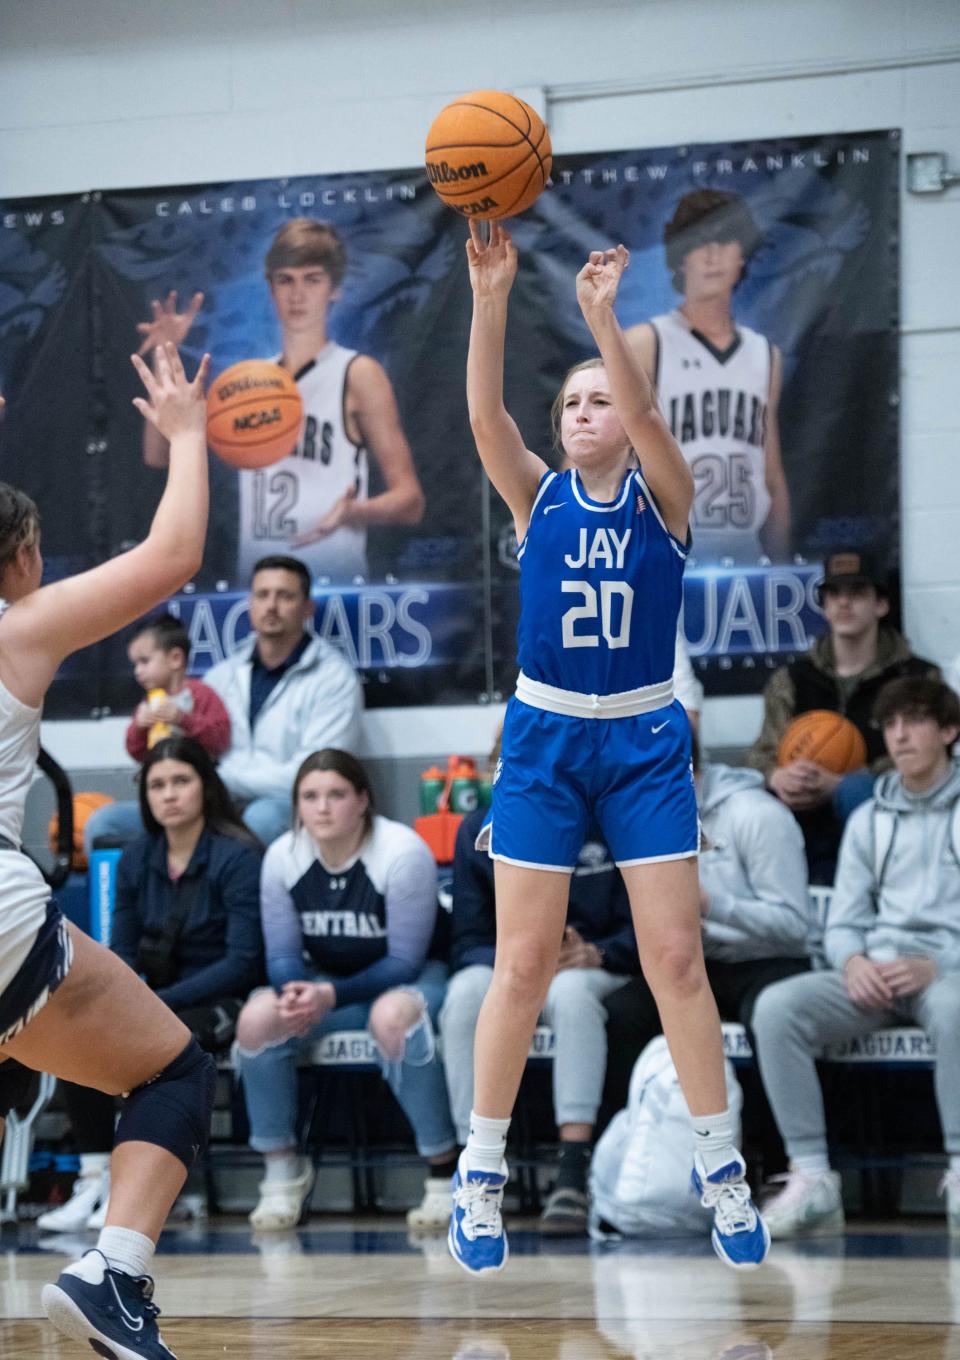 Presley Hawthorne (20) launches and sinks a three-pointer during the Jay vs Central girls basketball game at Central High School in Milton on Friday, Jan. 13, 2023.